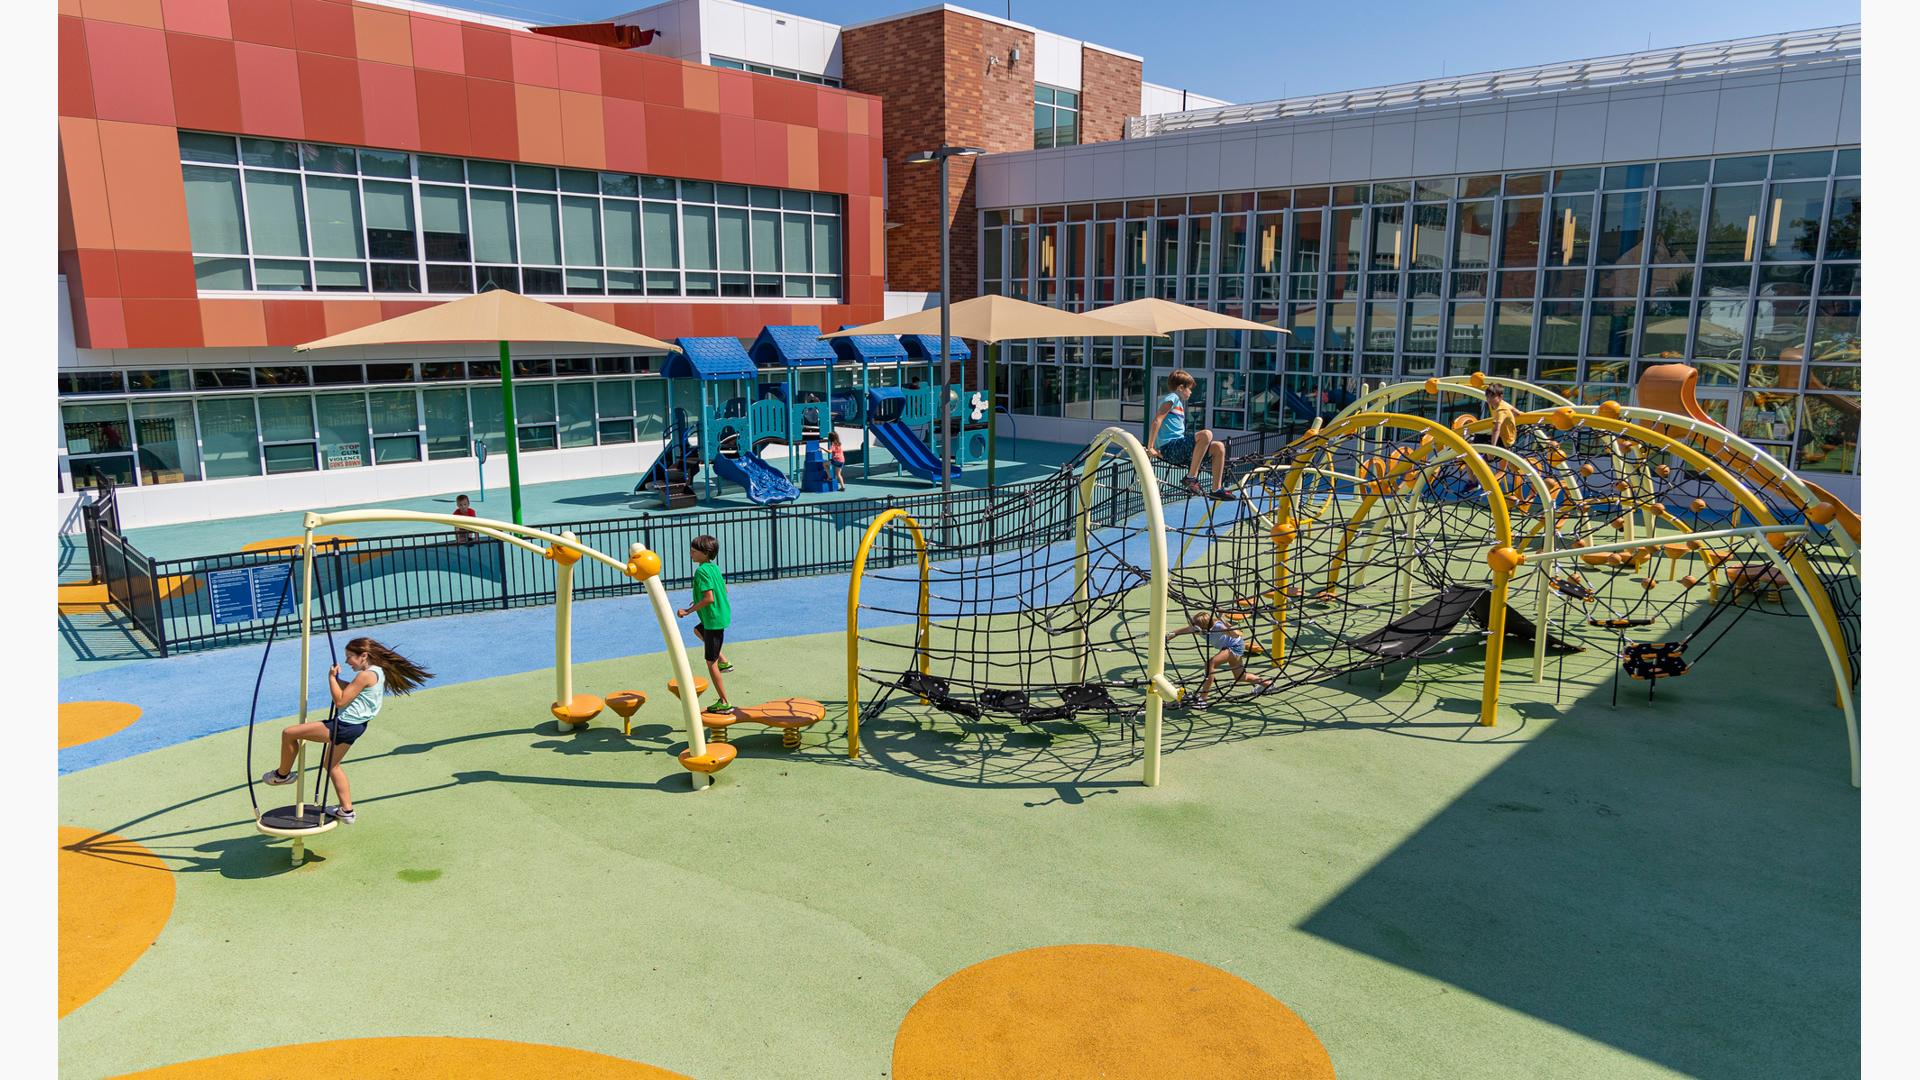 A large play area set in the inlet of a large building. A black iron fence separates a play area for younger children and older children. In the foreground older children play on a custom obstacle course like rope maze connected by large yellow arched posts.